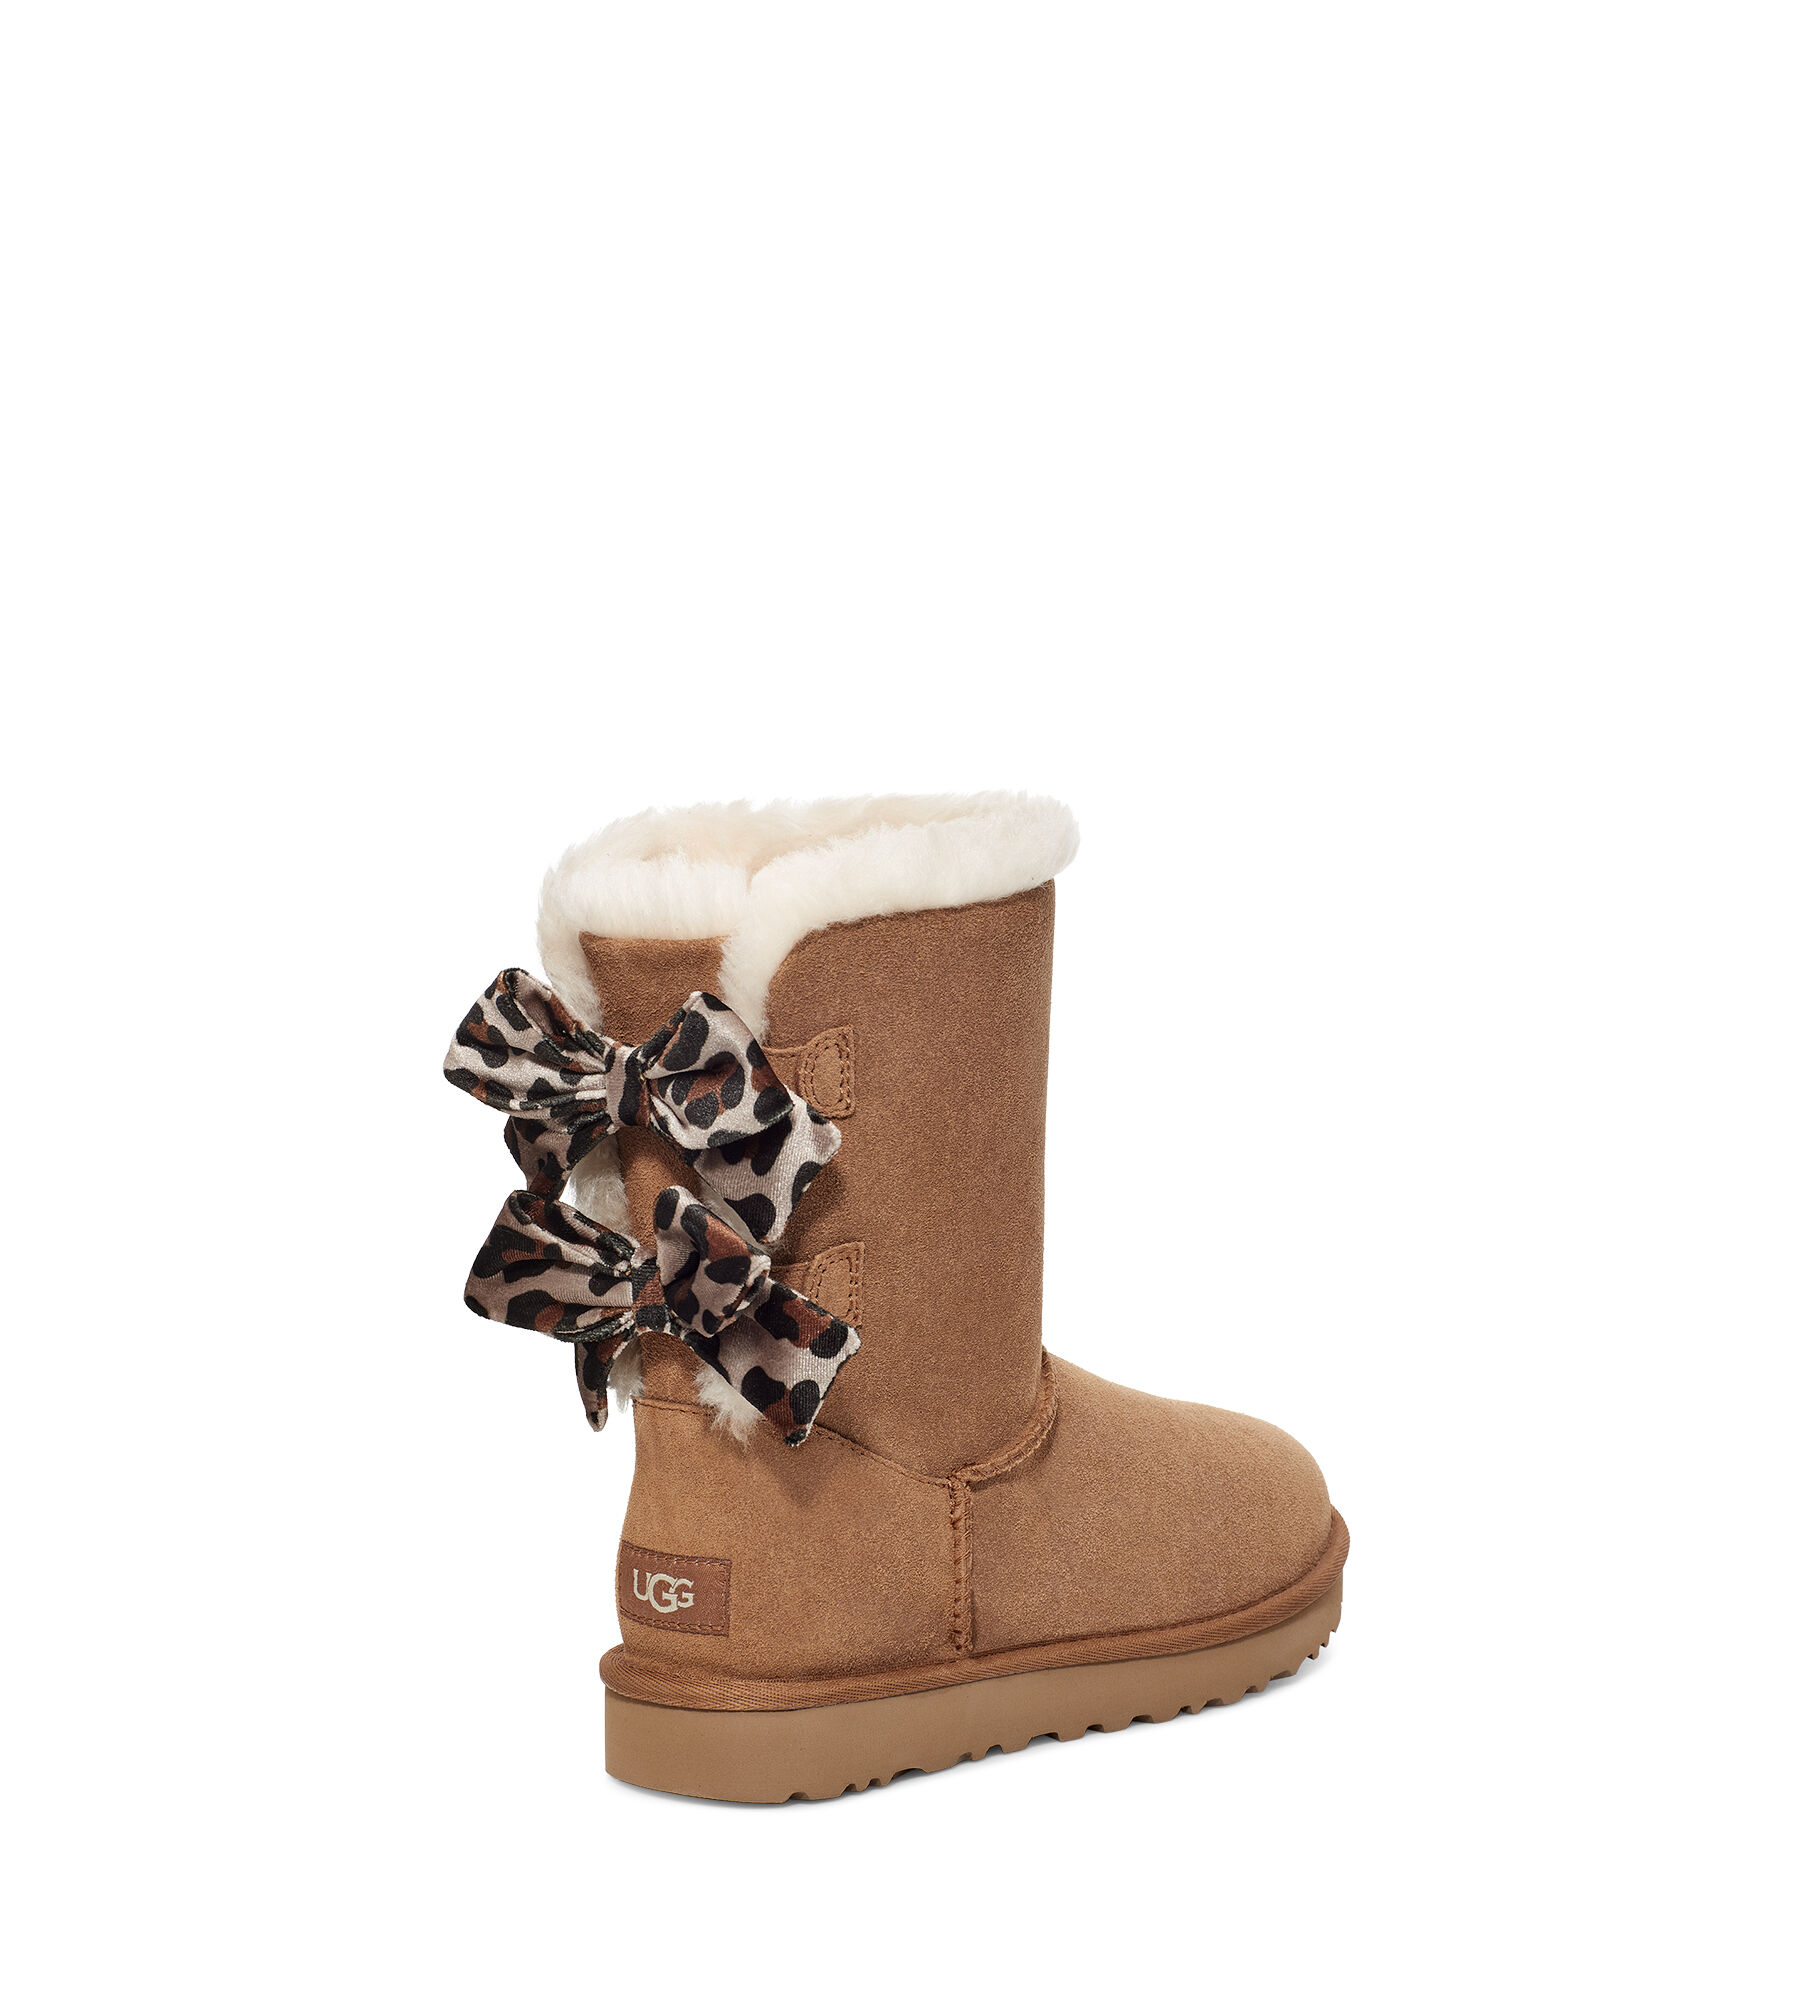 ugg clearance boots uk